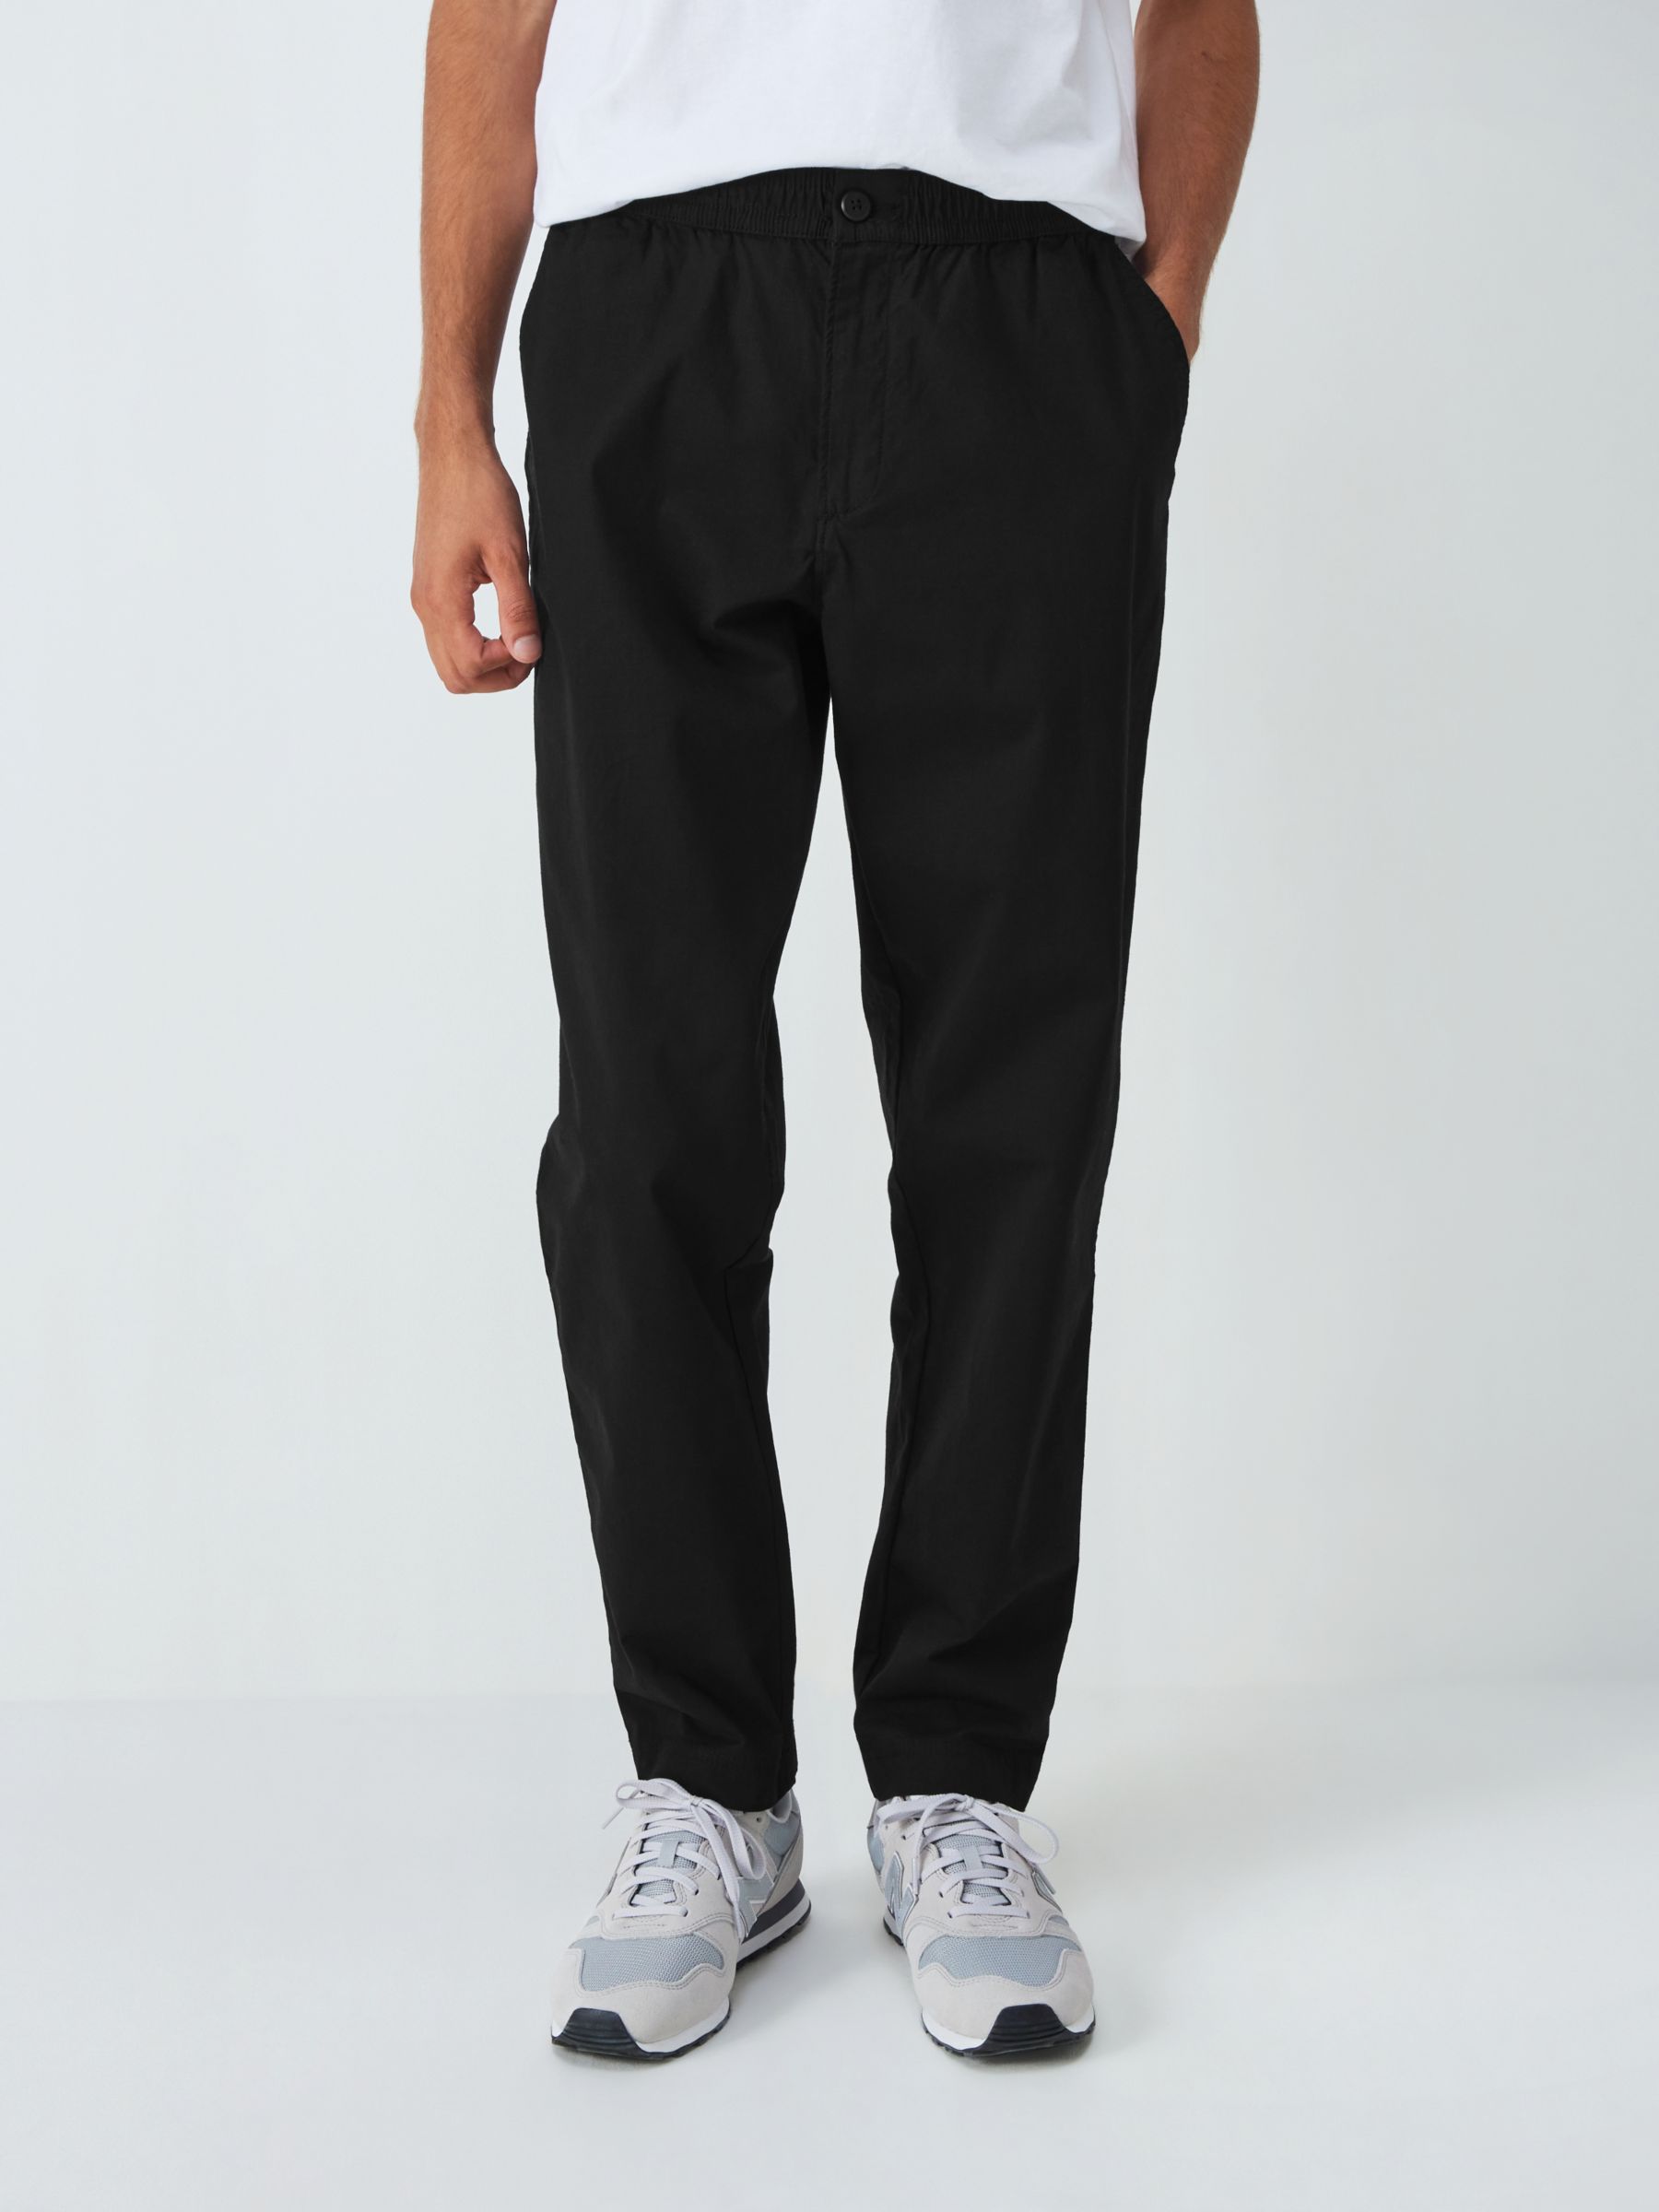 John Lewis ANYDAY Relaxed Fit Ripstop Stretch Cotton Ankle Trousers, Black  at John Lewis & Partners